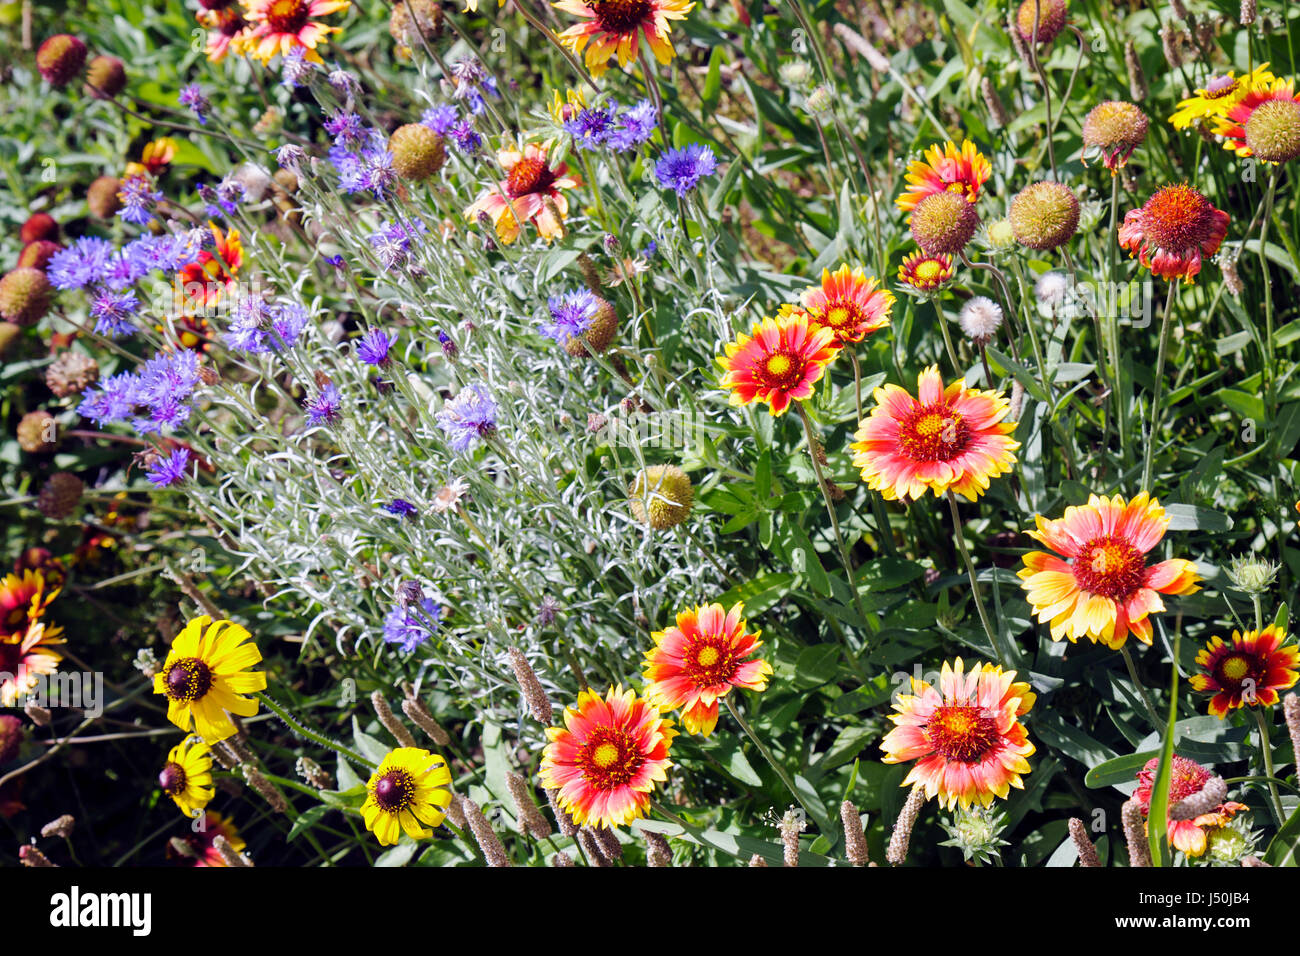 Montgomery Alabama,Perry Hill Road,wild flower flowers,Indian Blanket,orange,yellow,blue,flora,field,nature,beauty,Black Eyed Susan,roadside,visitors Stock Photo